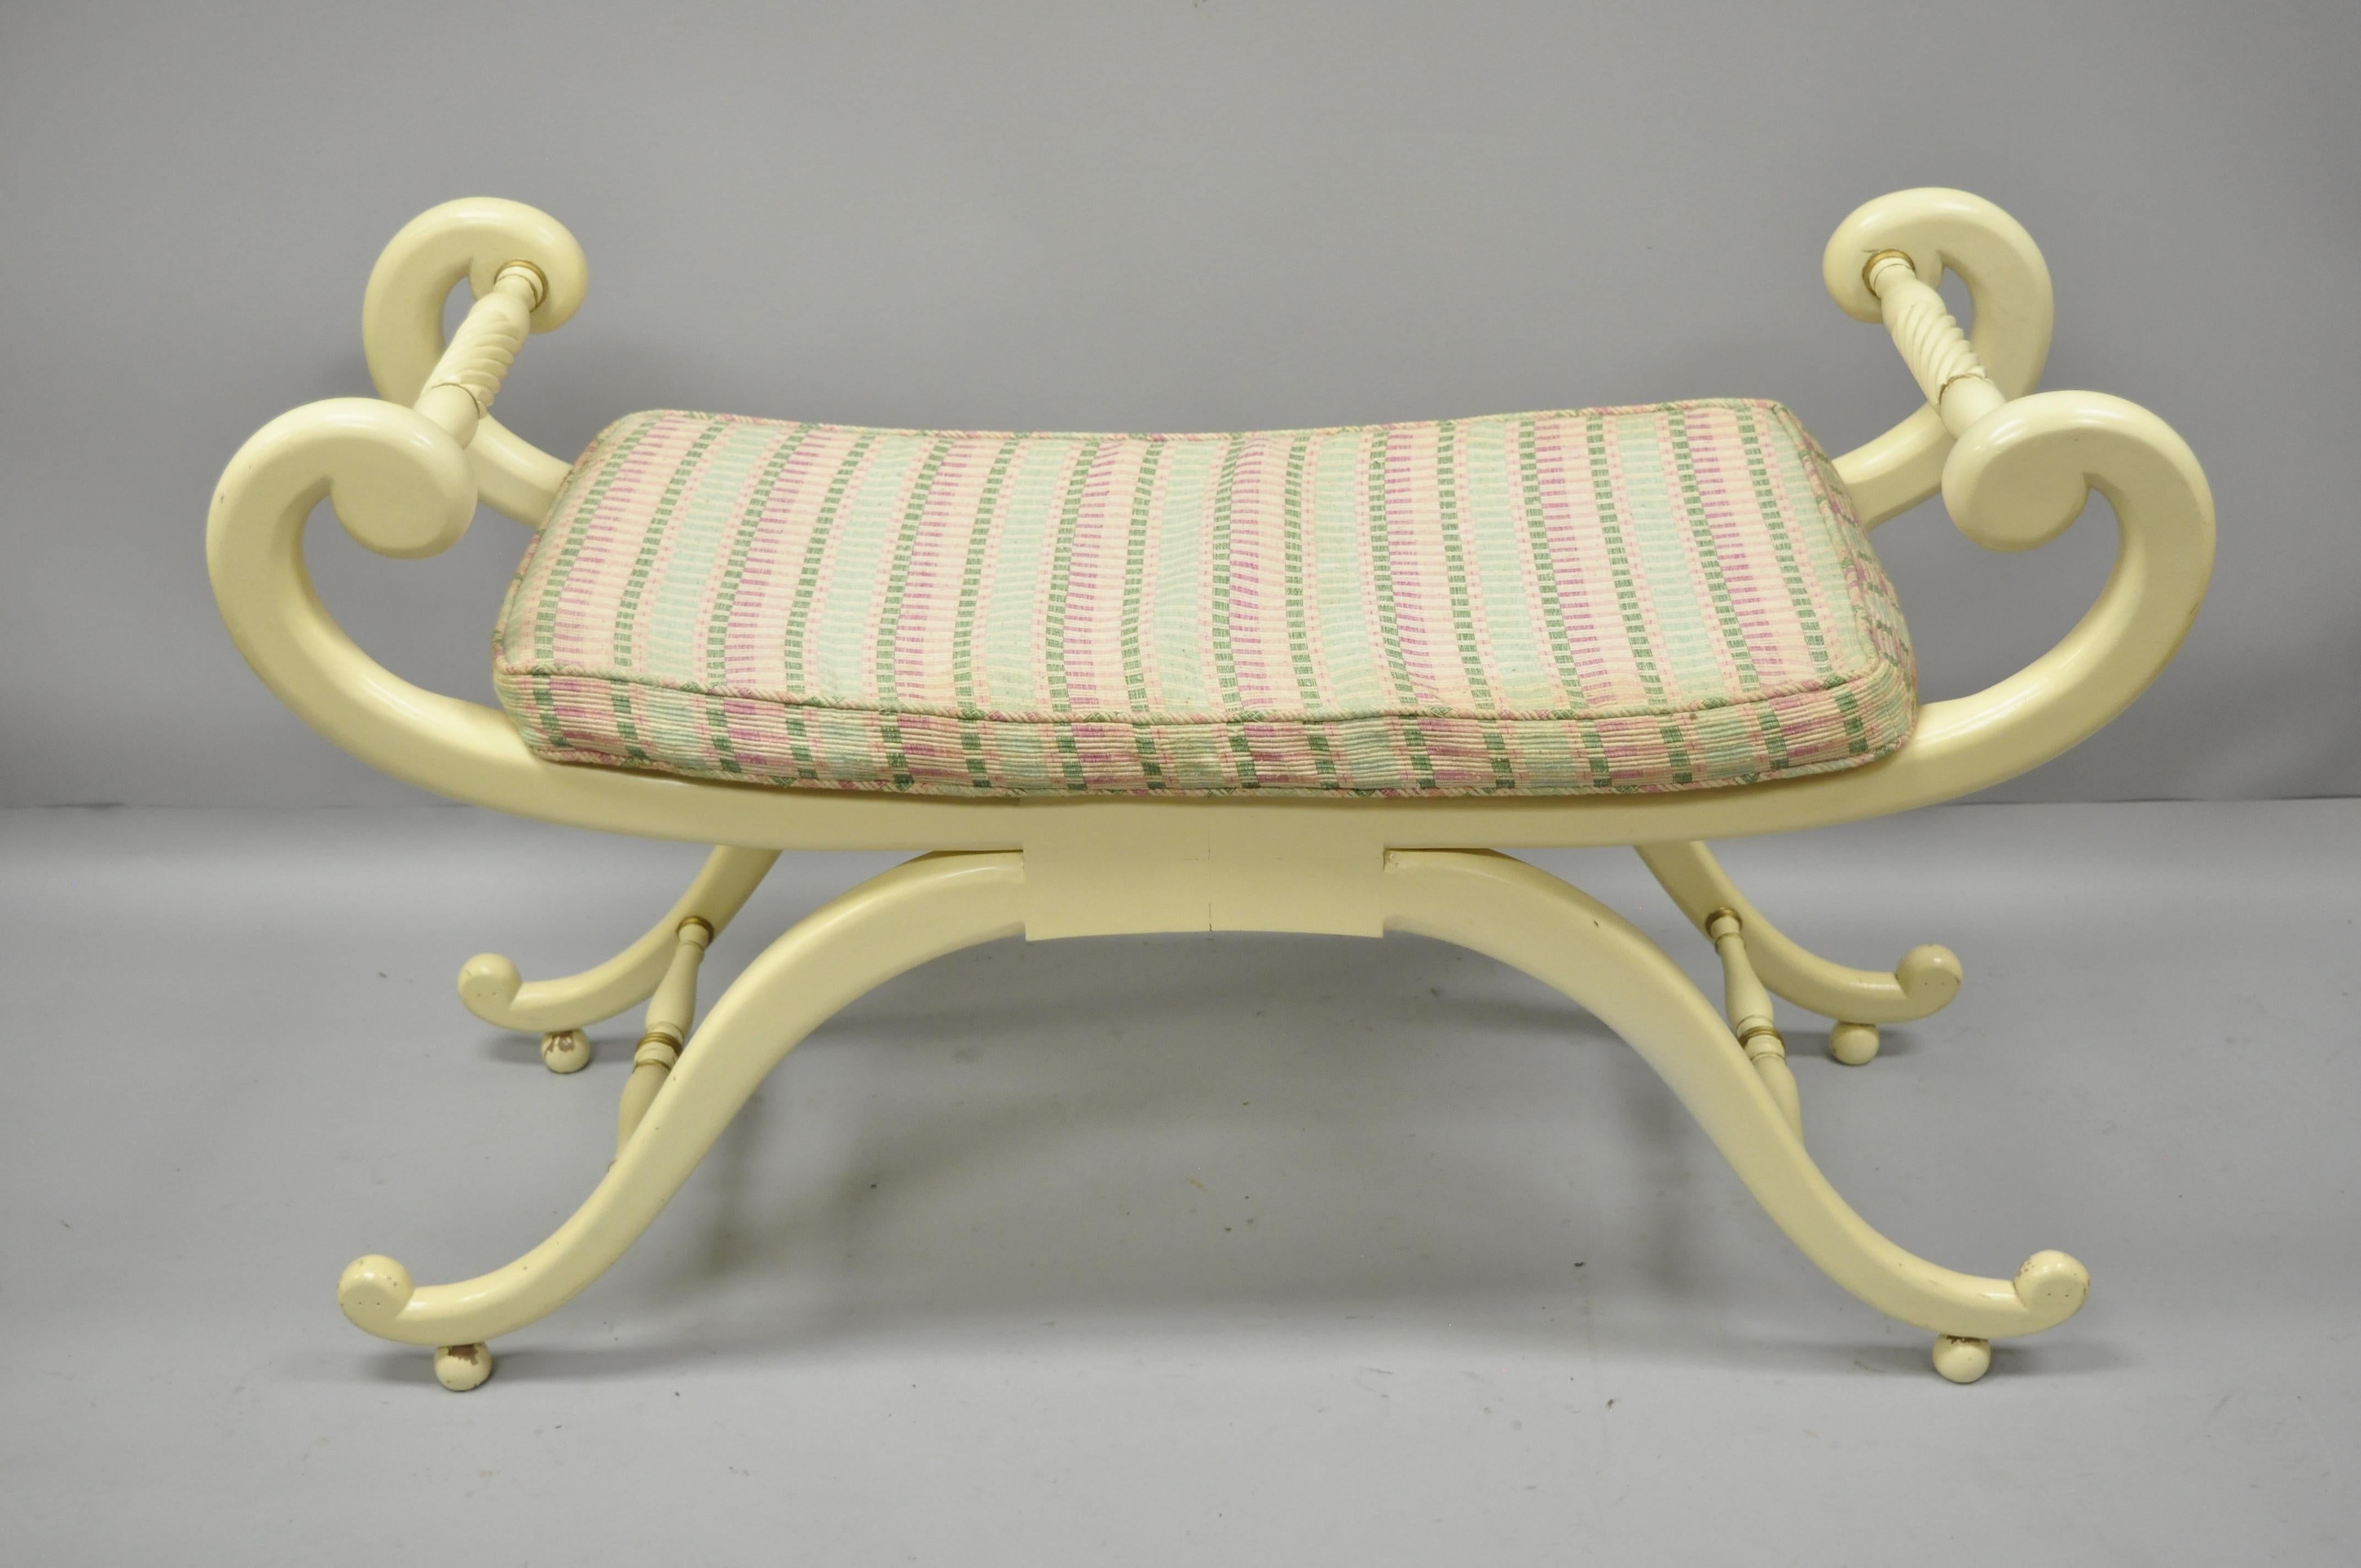 American Vintage French Regency Neoclassical Style Cane Seat Curule X-Frame Bench